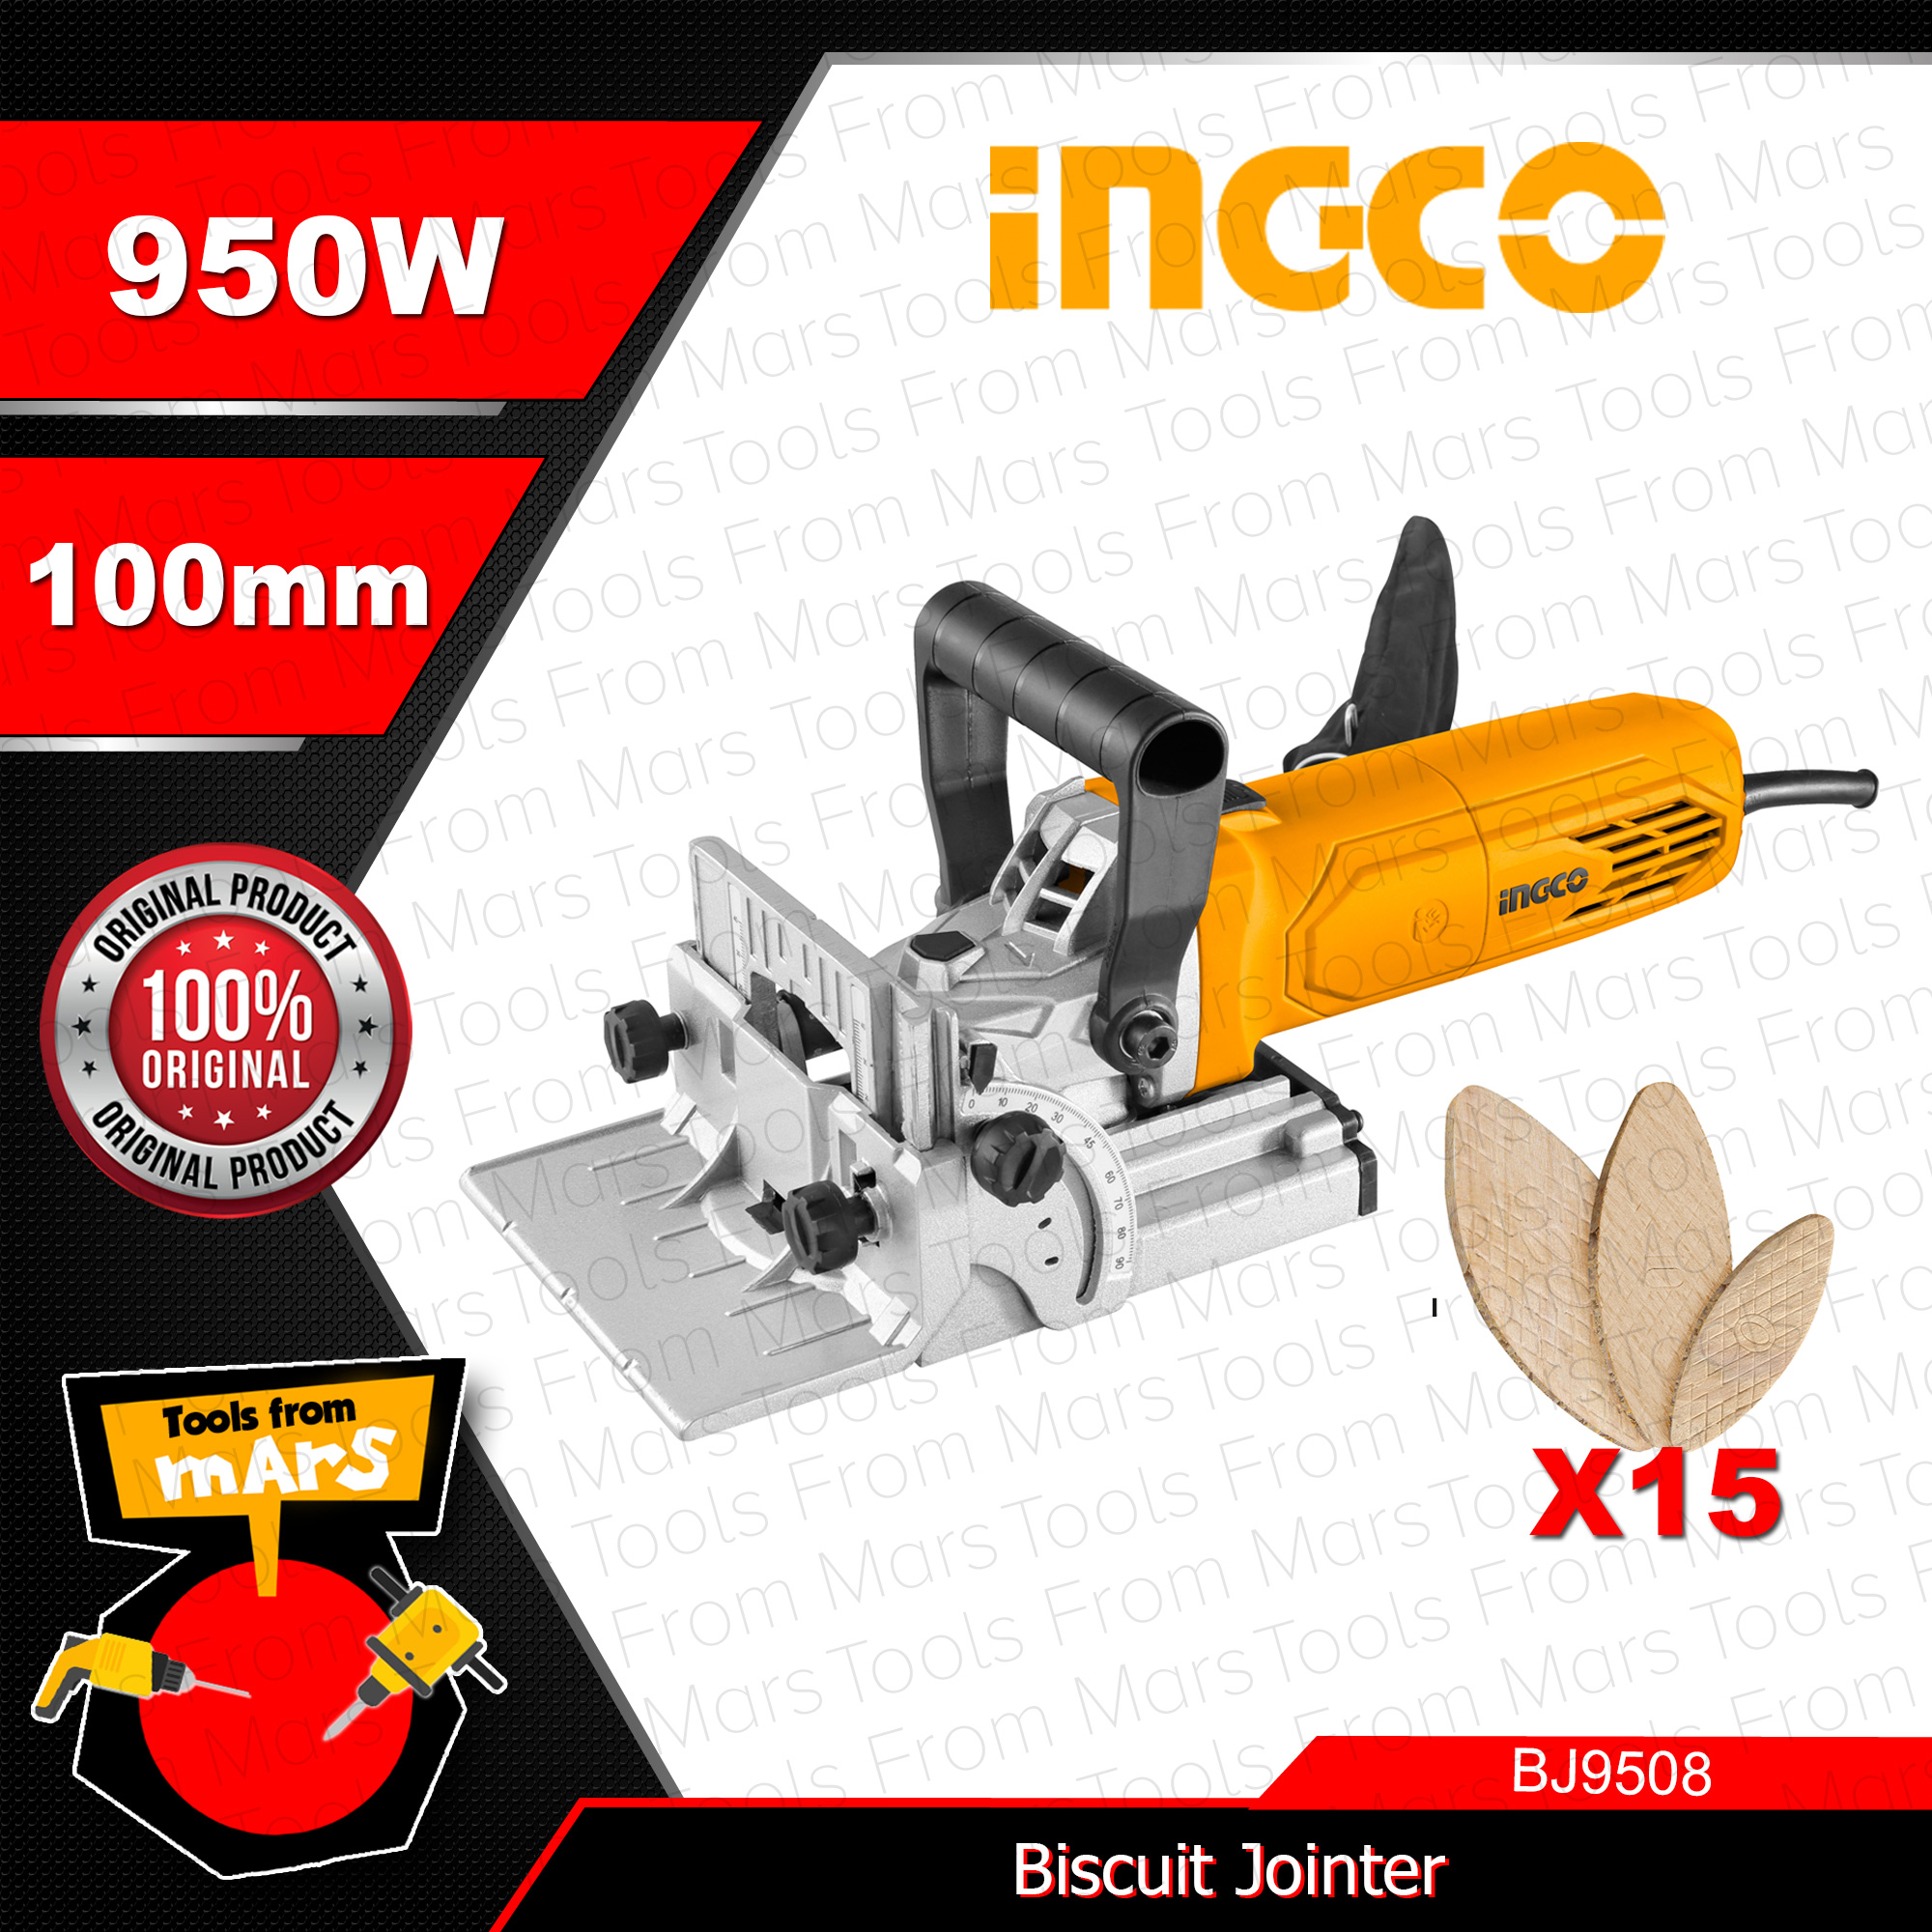 18+ Ingco biscuit jointer info